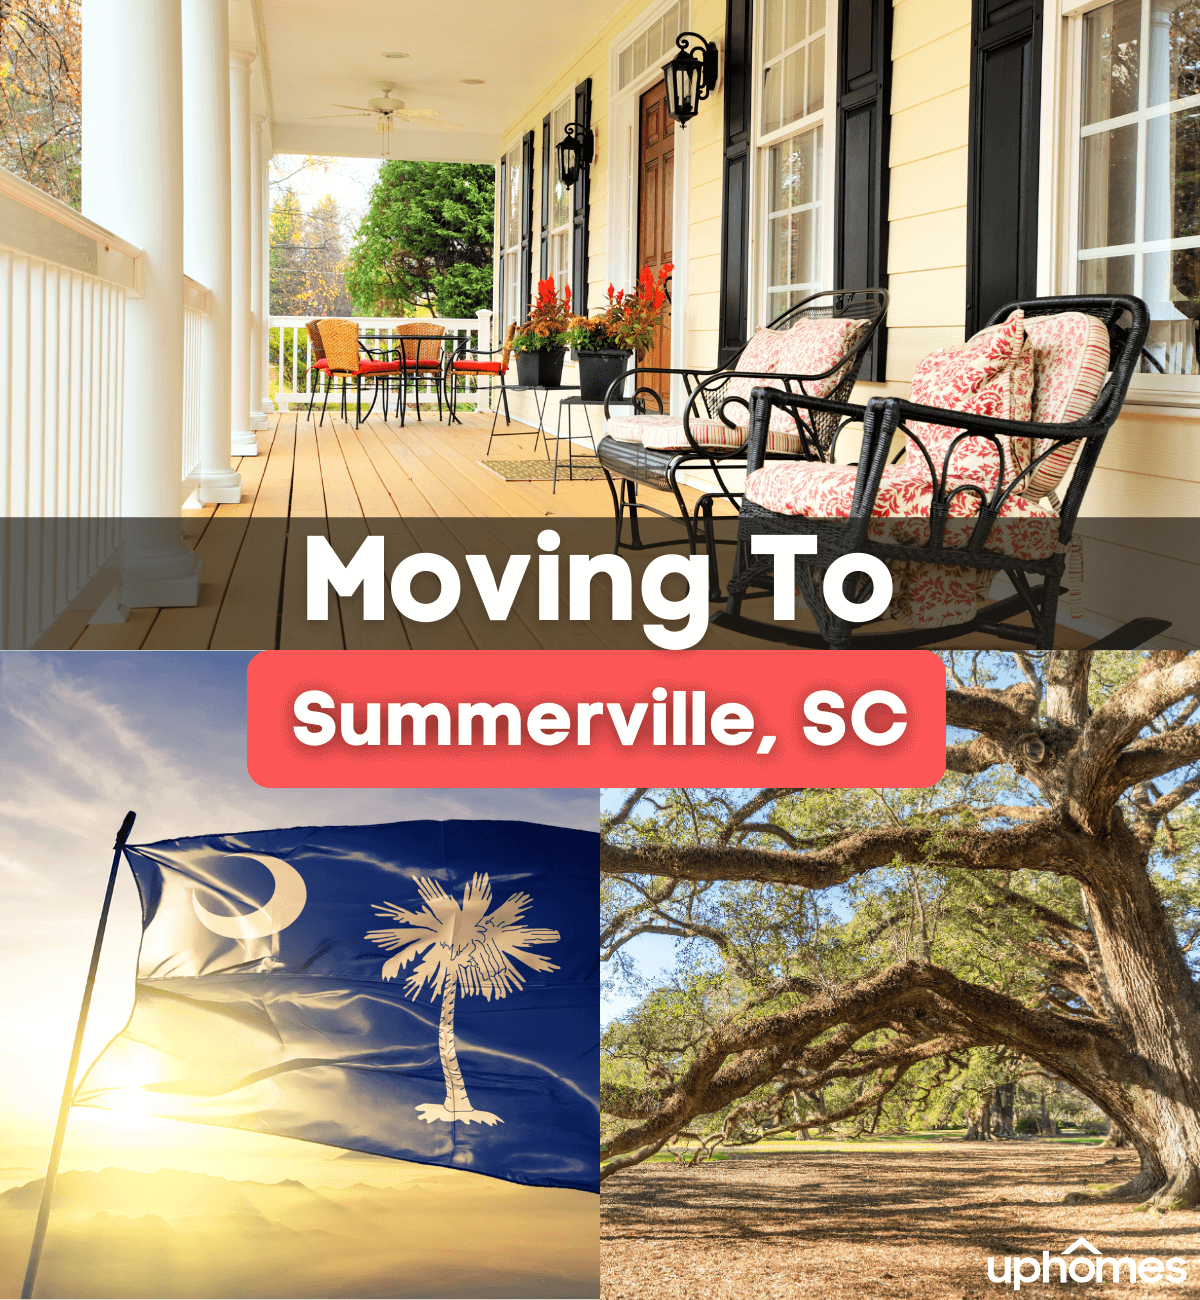 Moving to Summerville SC - 10 Reasons You'll Love Living in Summerville